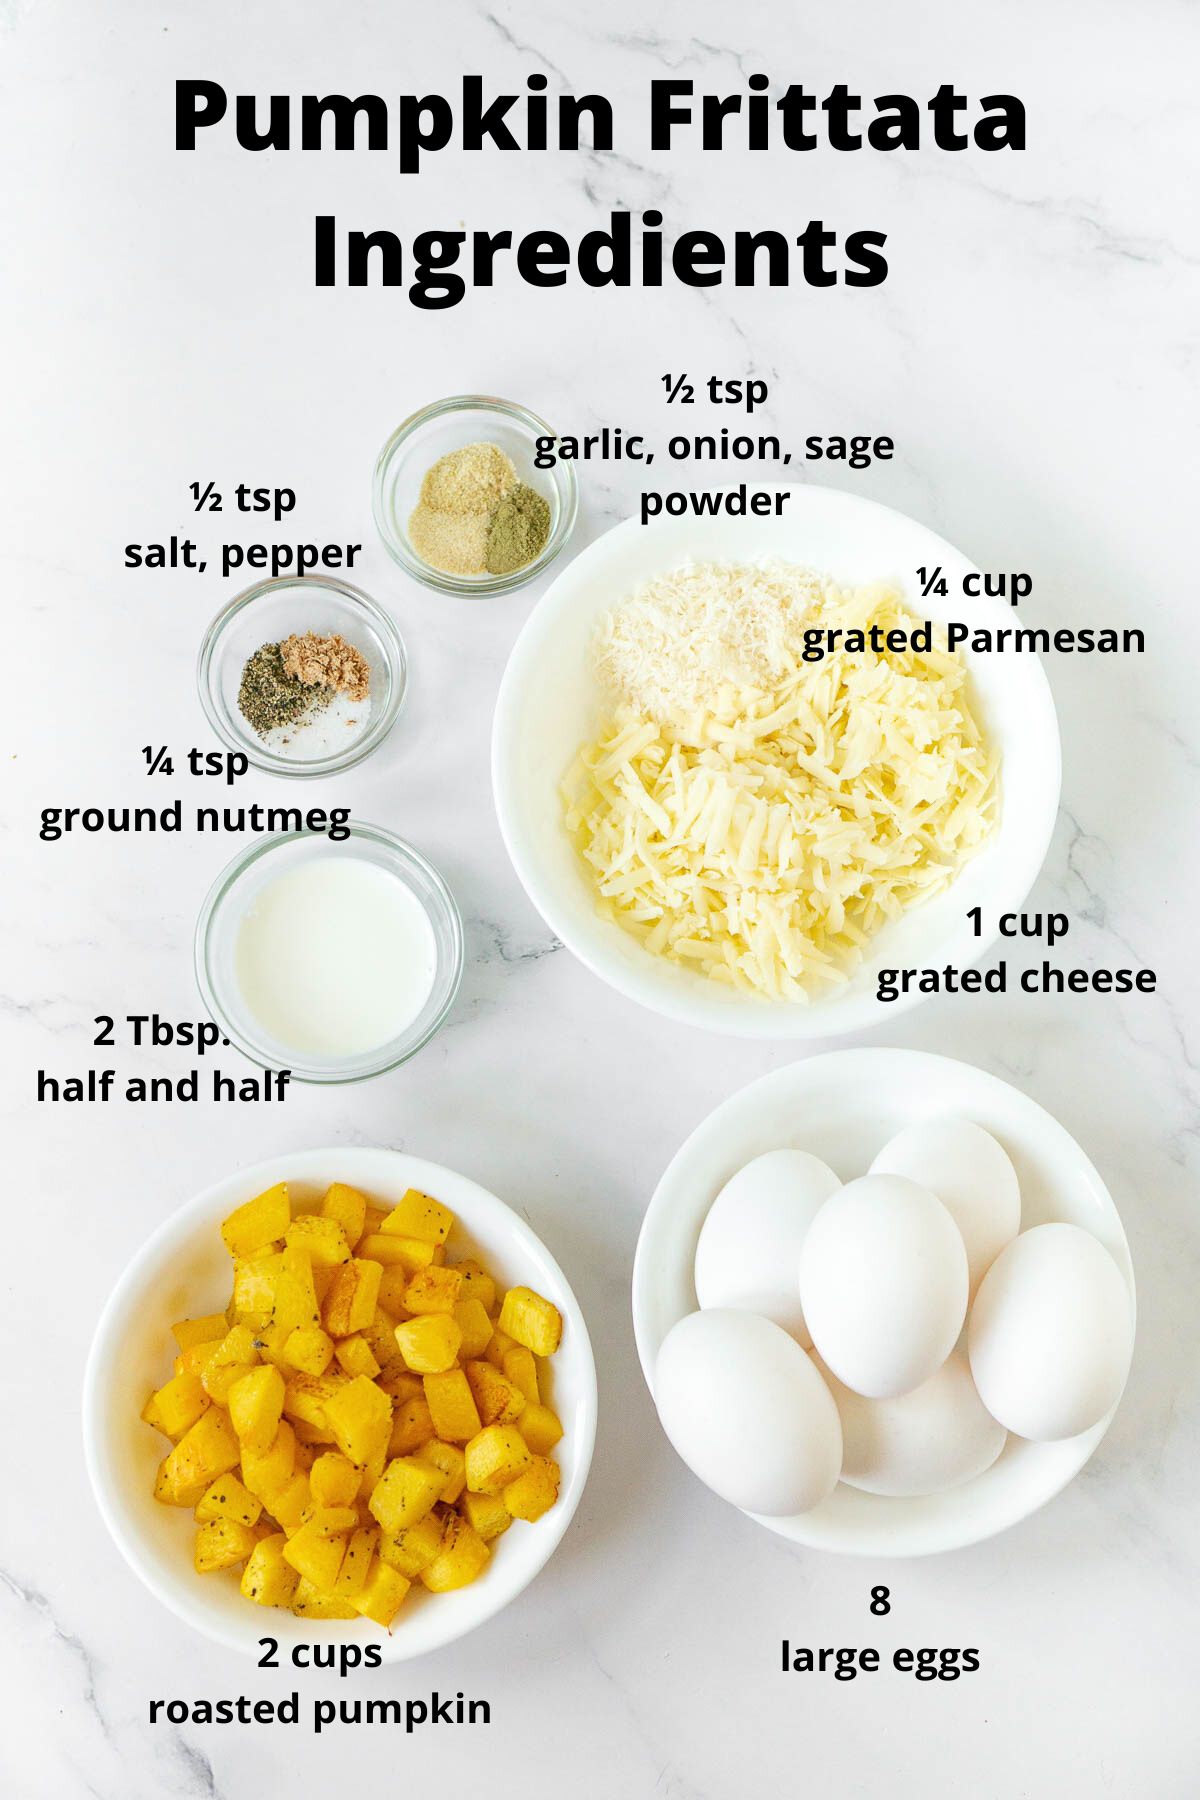 Ingredients for pumpkin frittata with labels